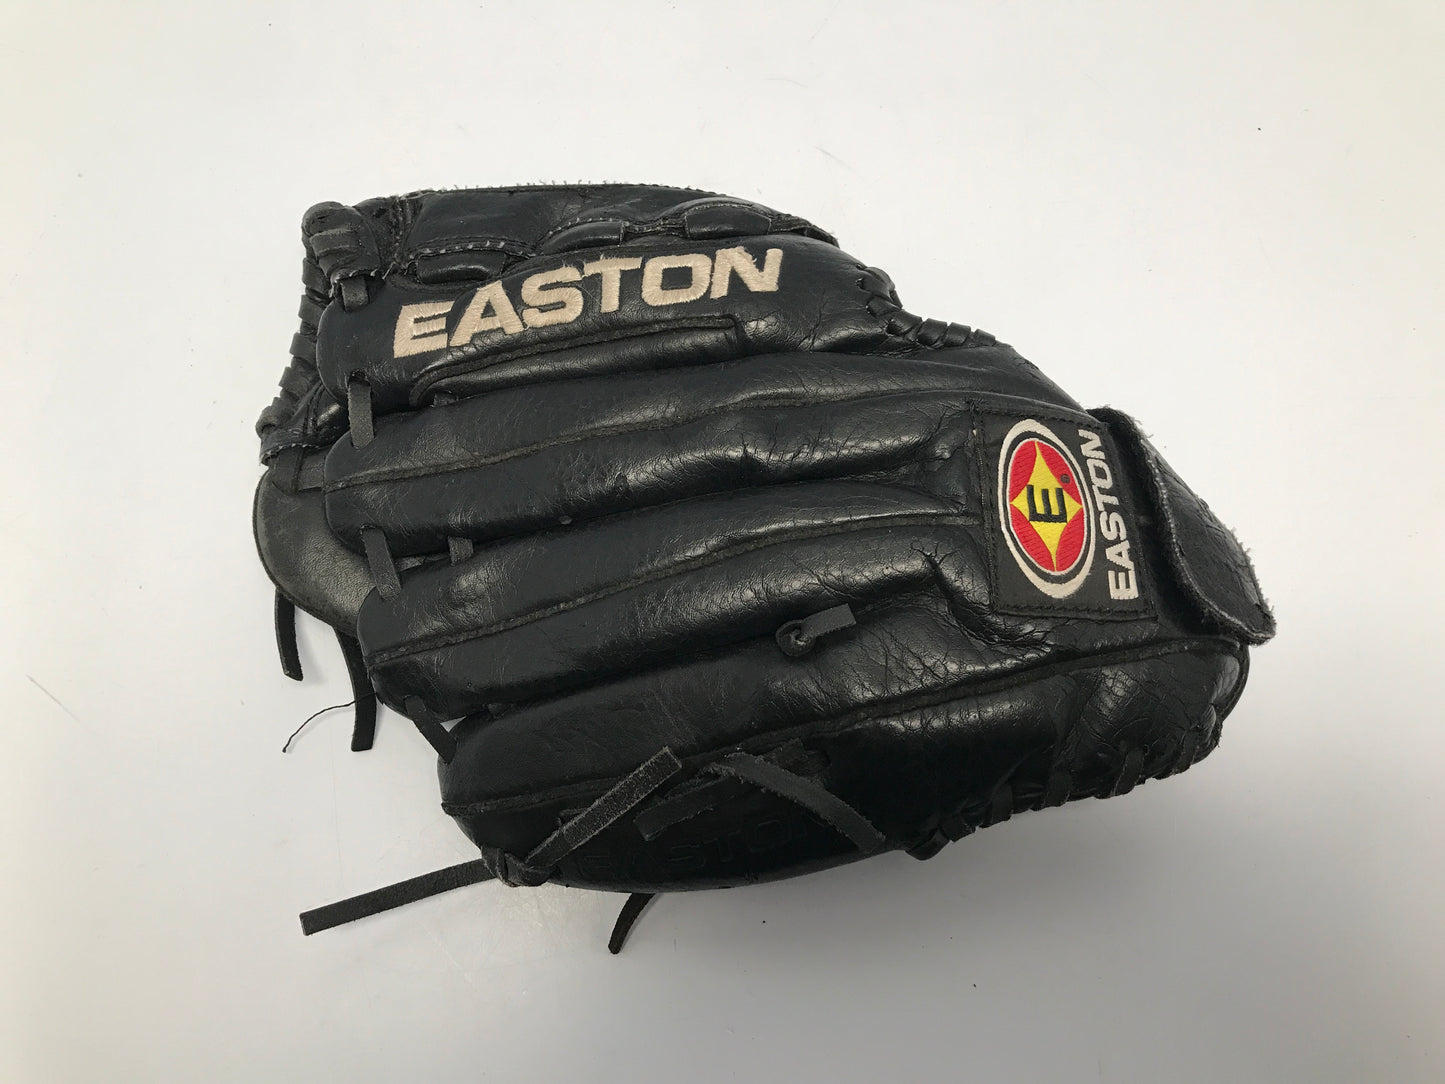 Baseball Glove Child Junior Size 11in Easton Heavy Leather Fits on Left Hand